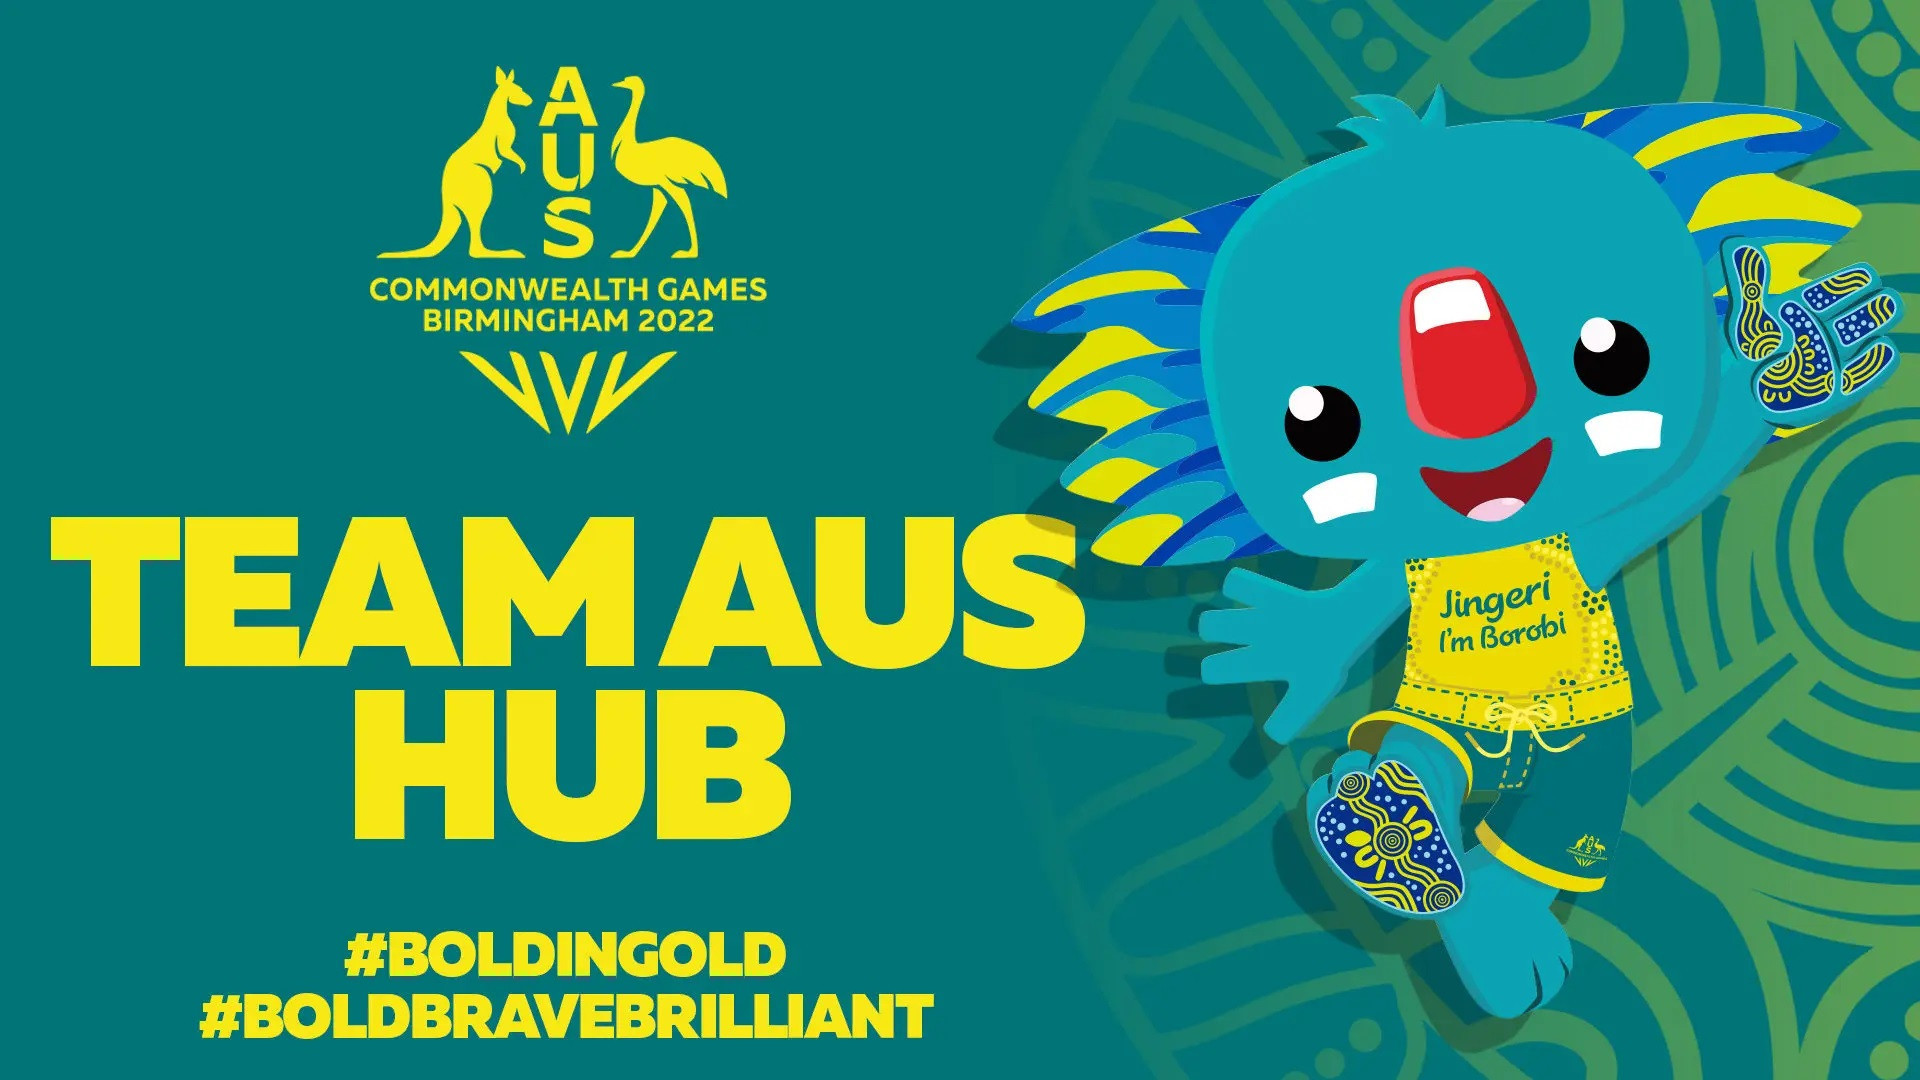 The digital fan hub has been launched prior to the Commonwealth Games in Birmingham ©Commonwealth Games Australia